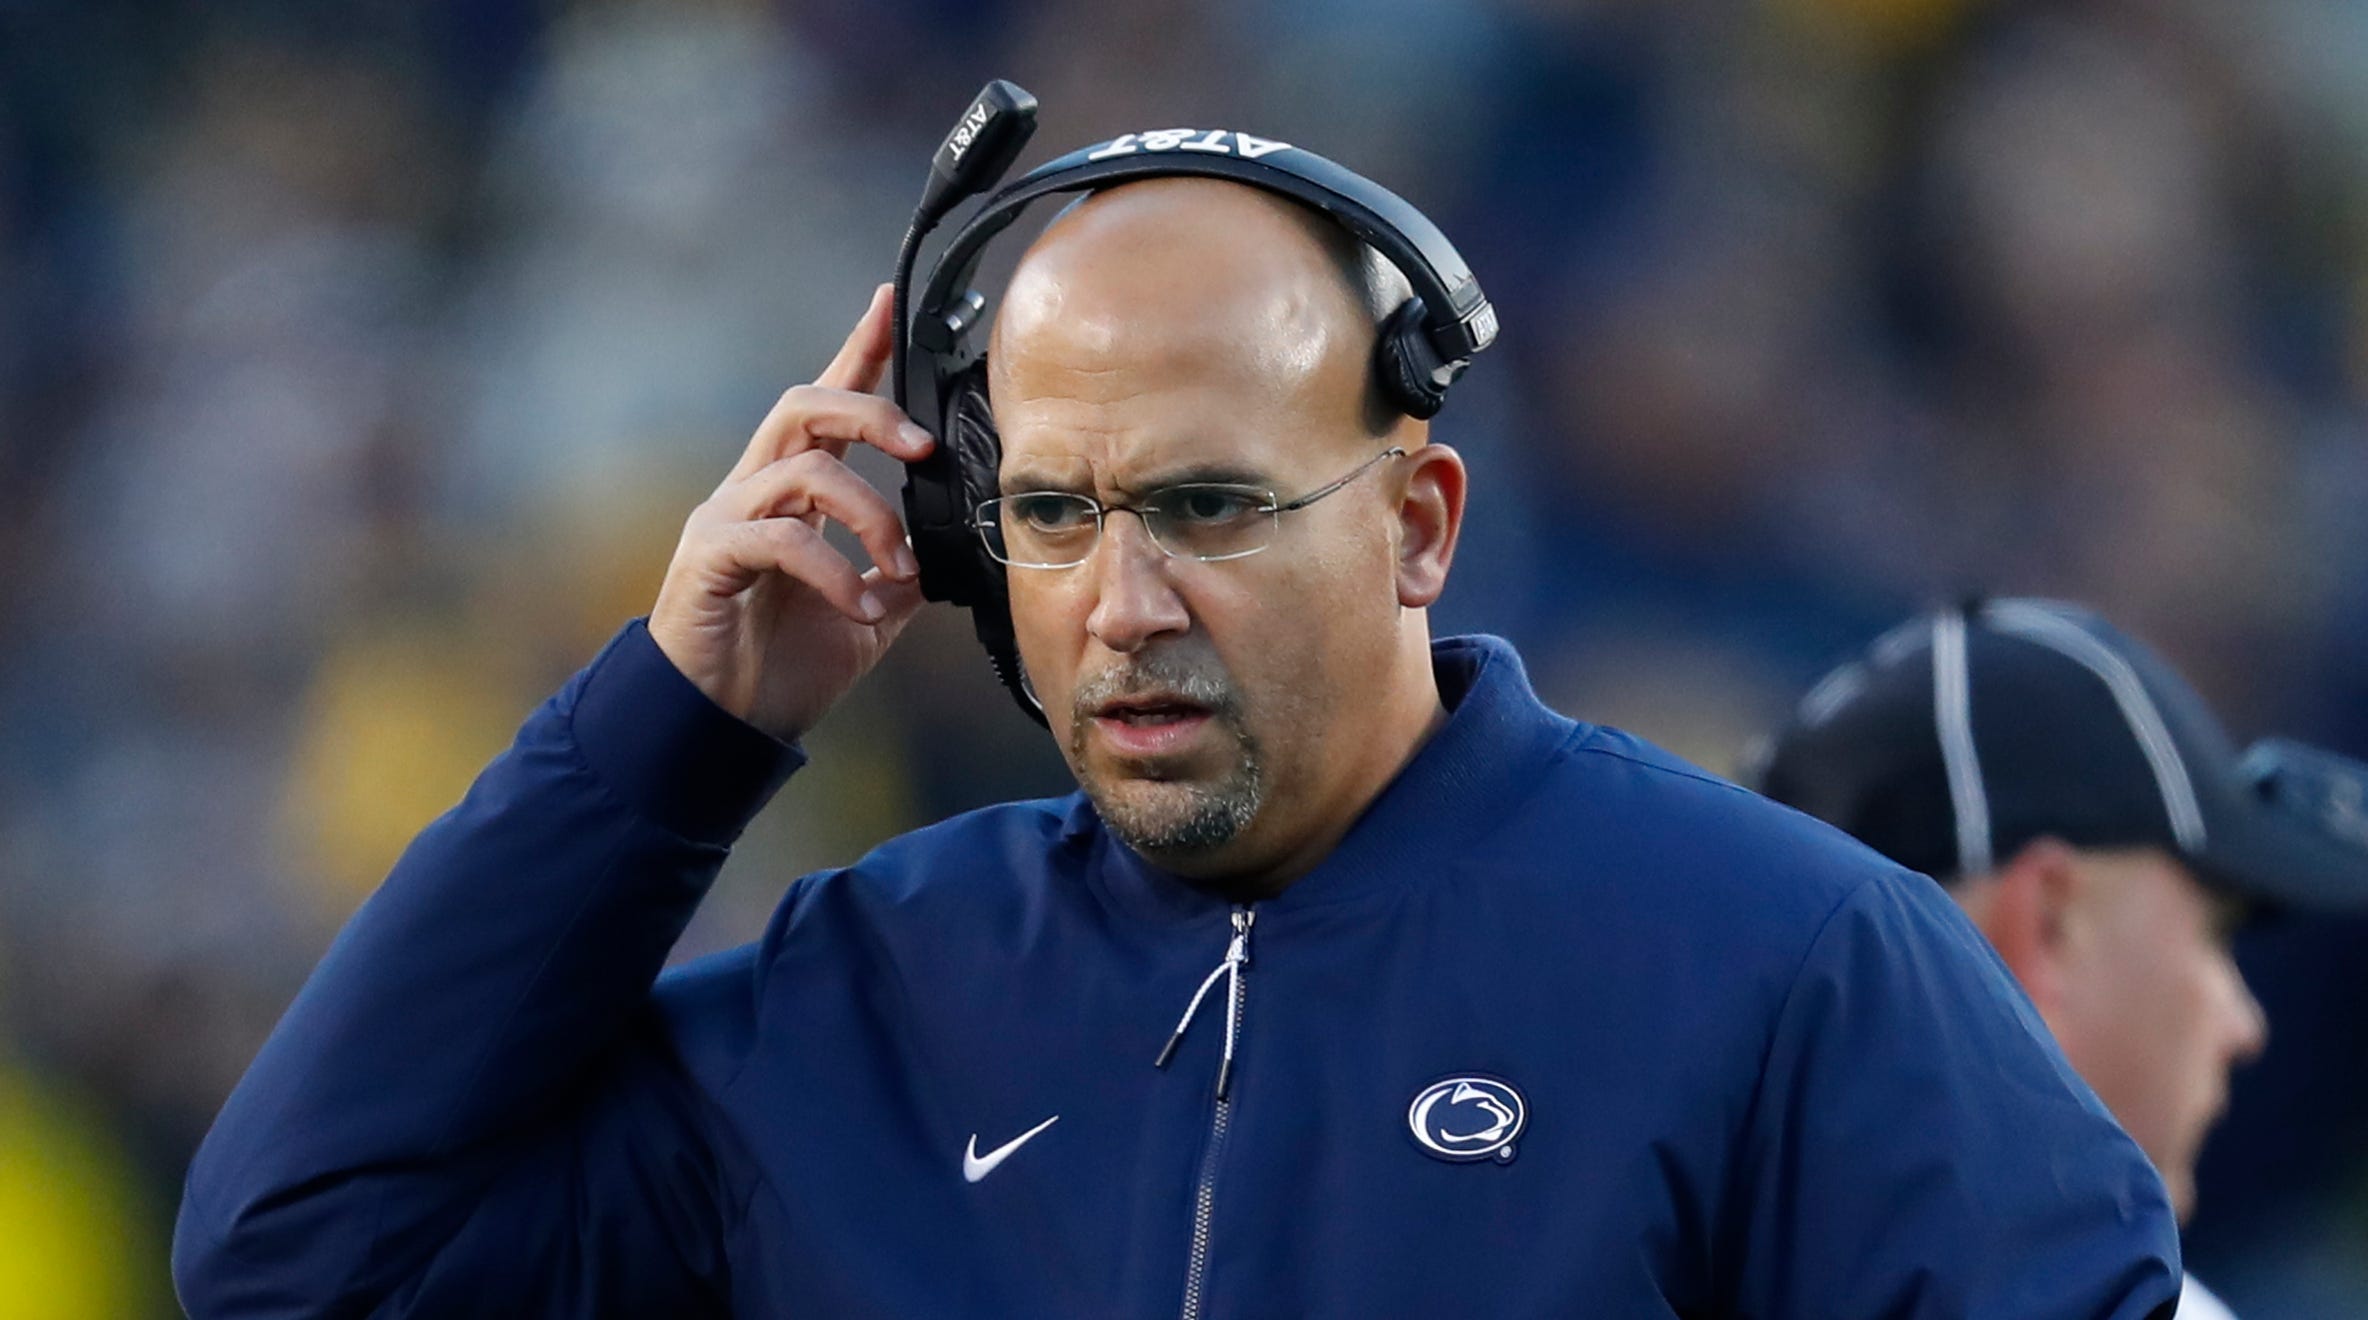 James Franklin and USC Here's Penn State coach's salary, buyout info